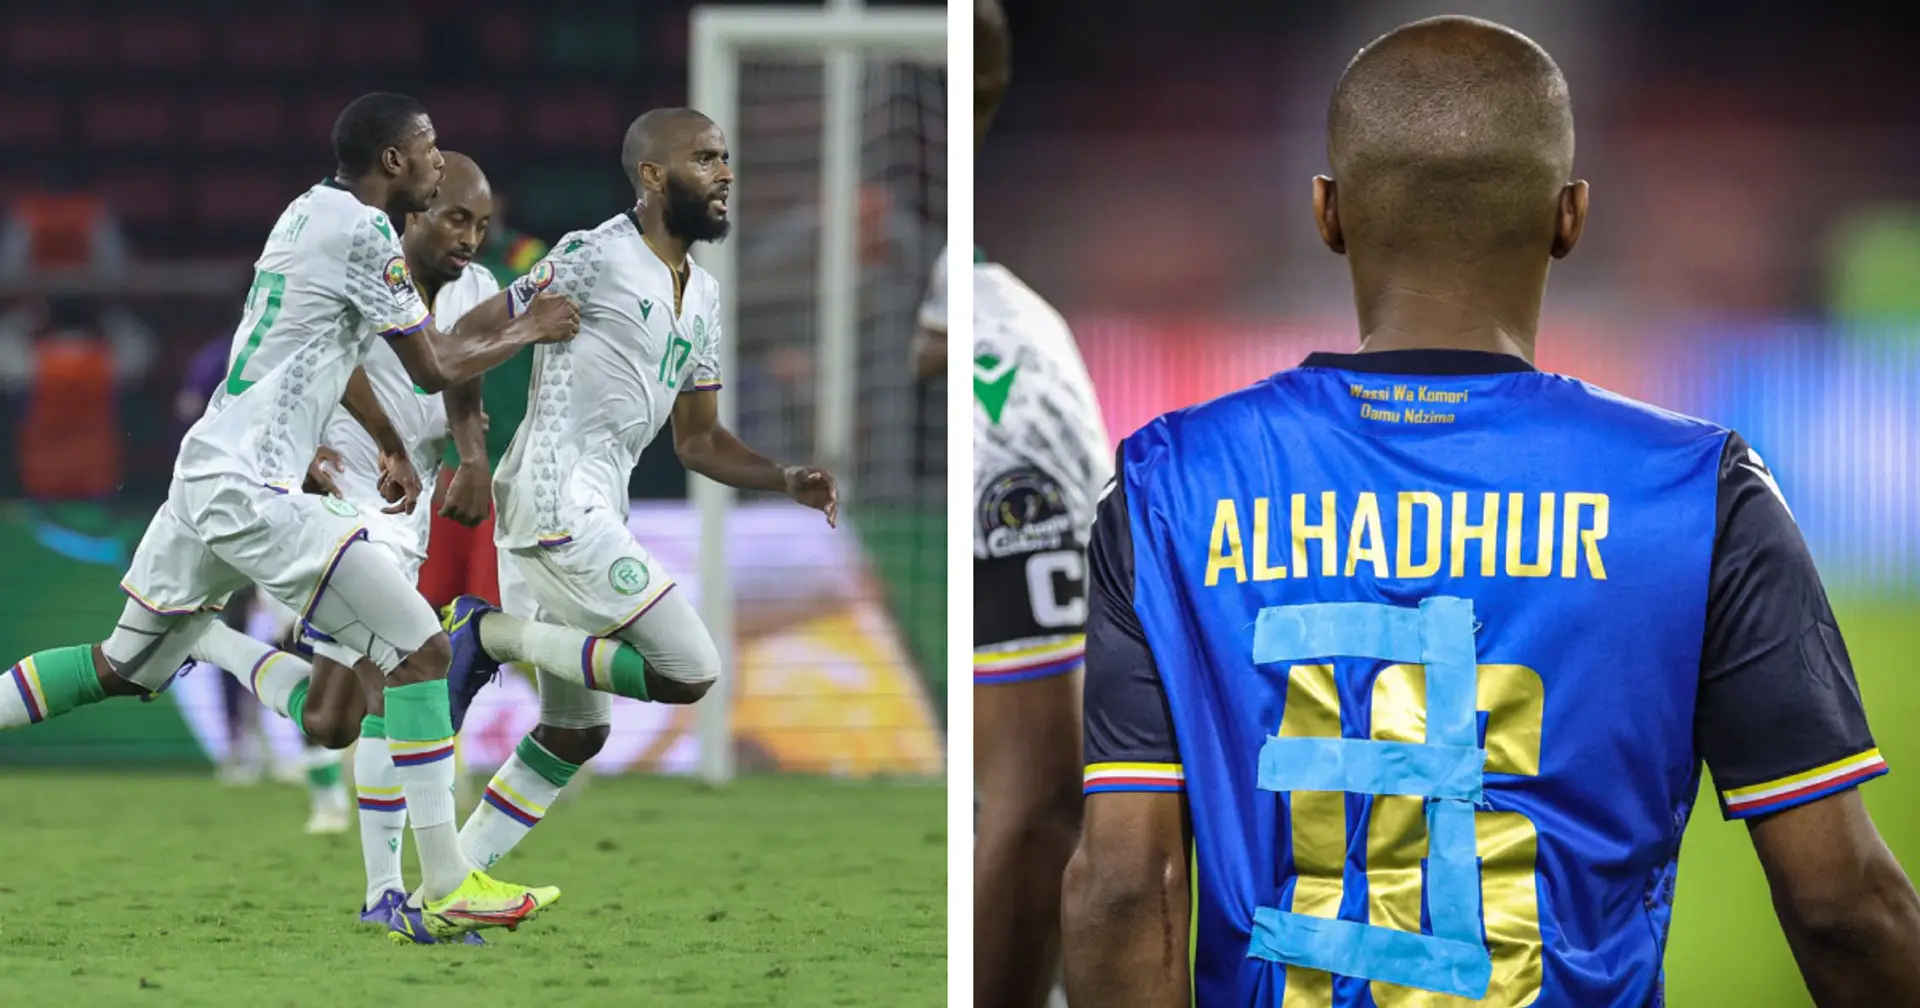 Madness at AFCON: Comoros play with outfield player instead of goalkeeper, still manage to score